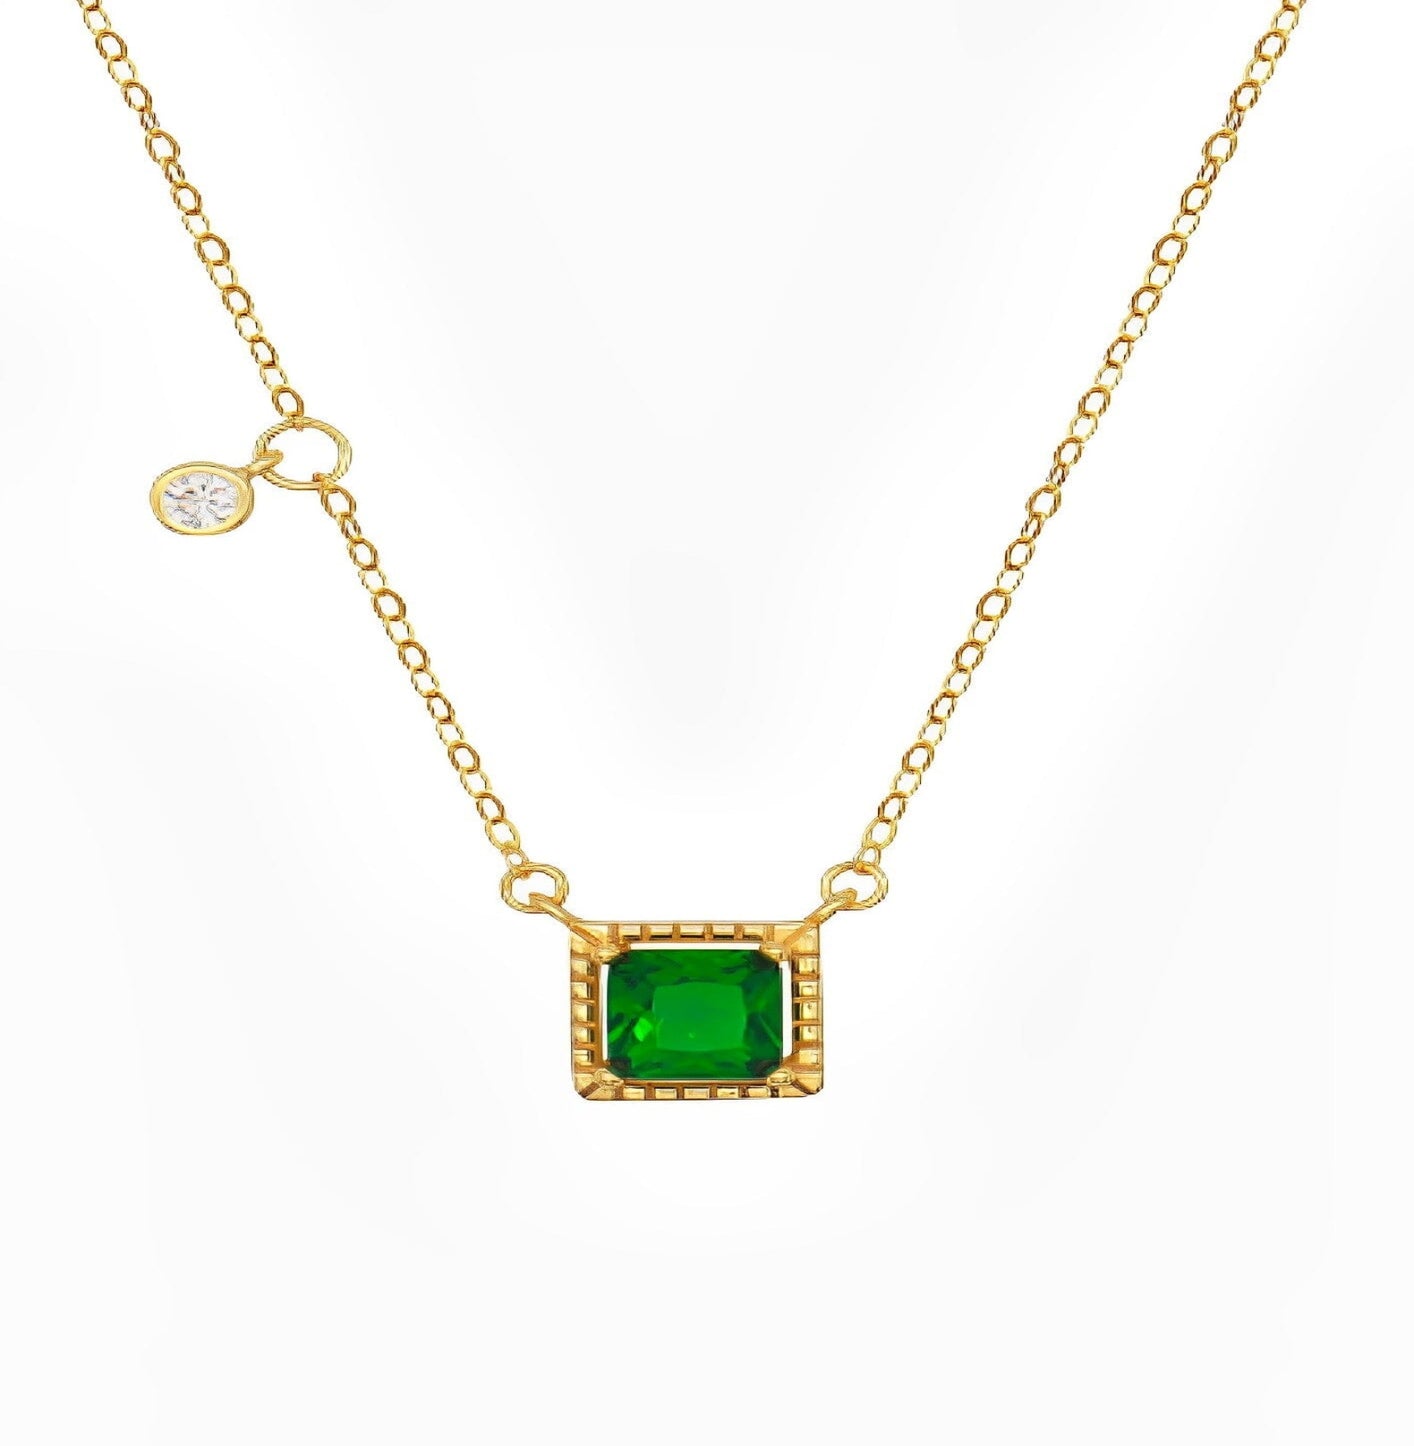 SQUARE CRYSTAL NECKLACE neck Yubama Jewelry Online Store - The Elegant Designs of Gold and Silver ! 